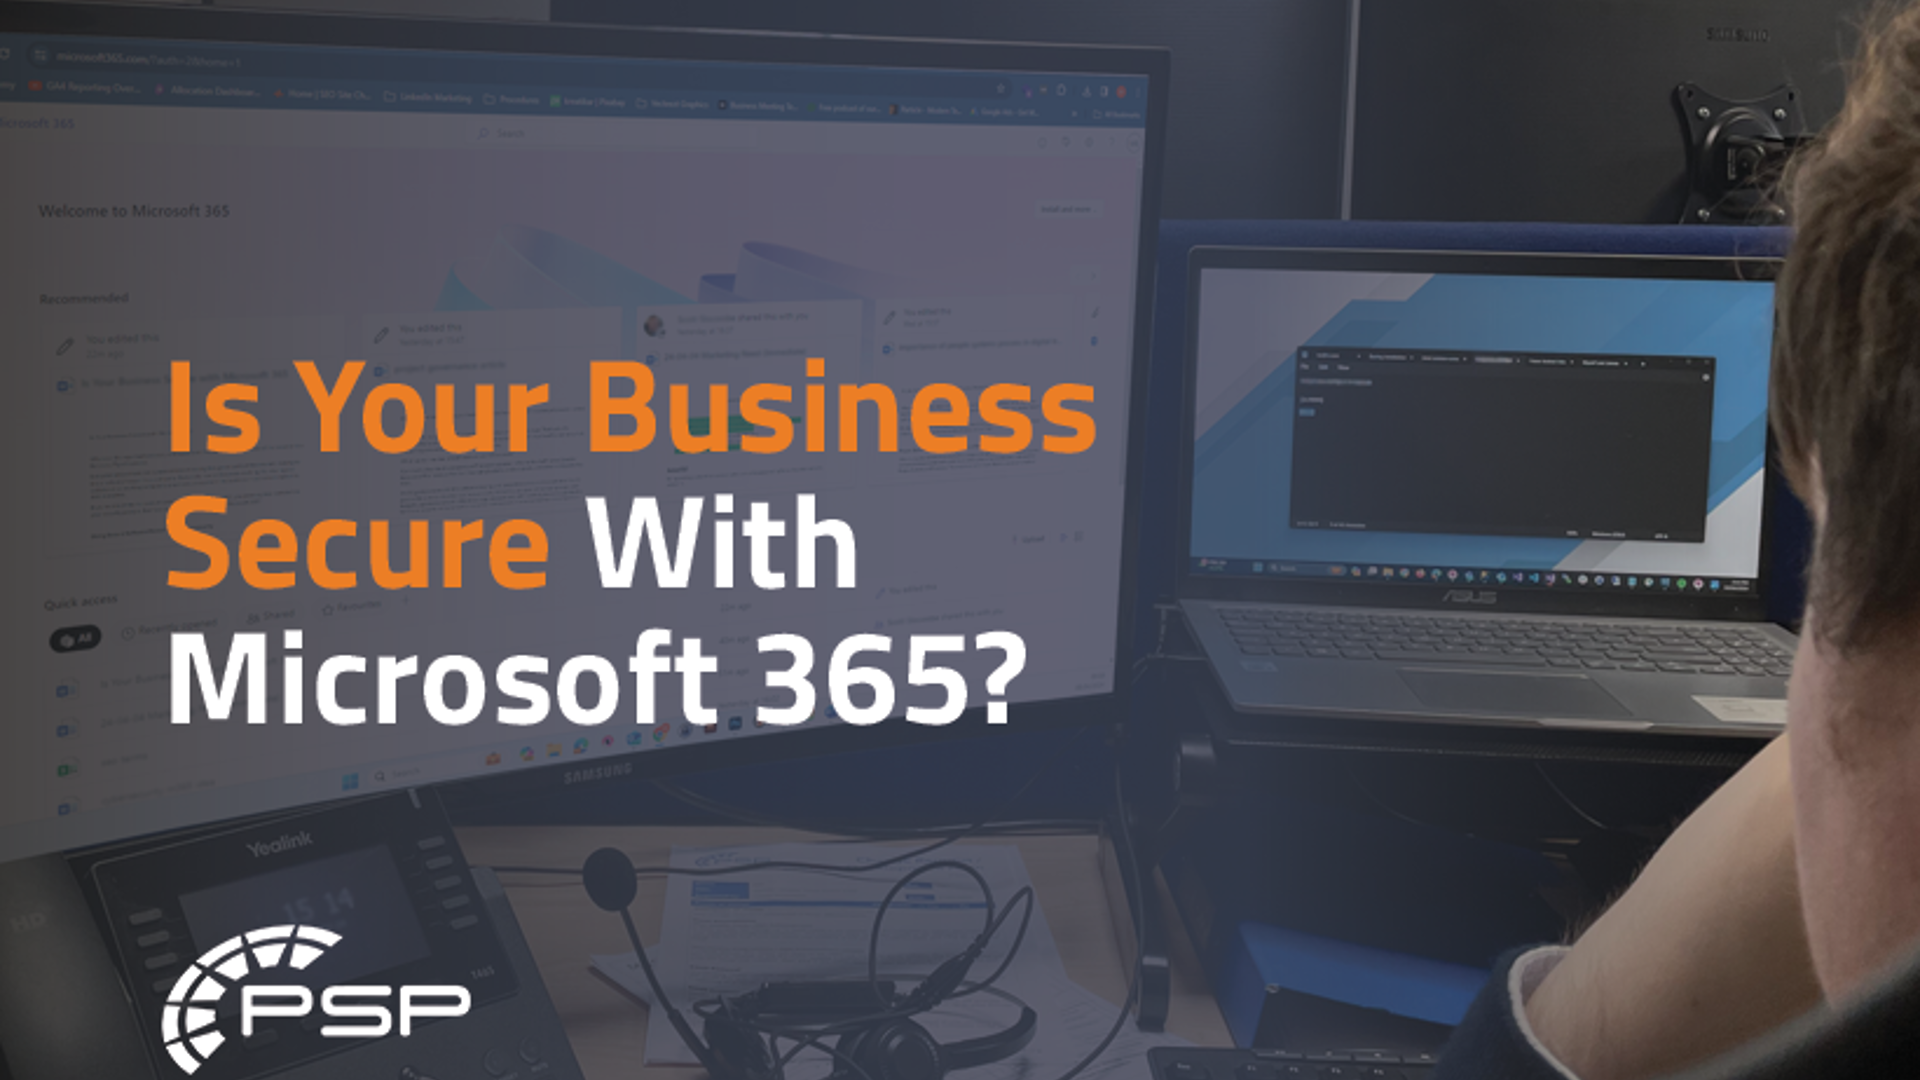 Is your business secure with Microsoft 365?